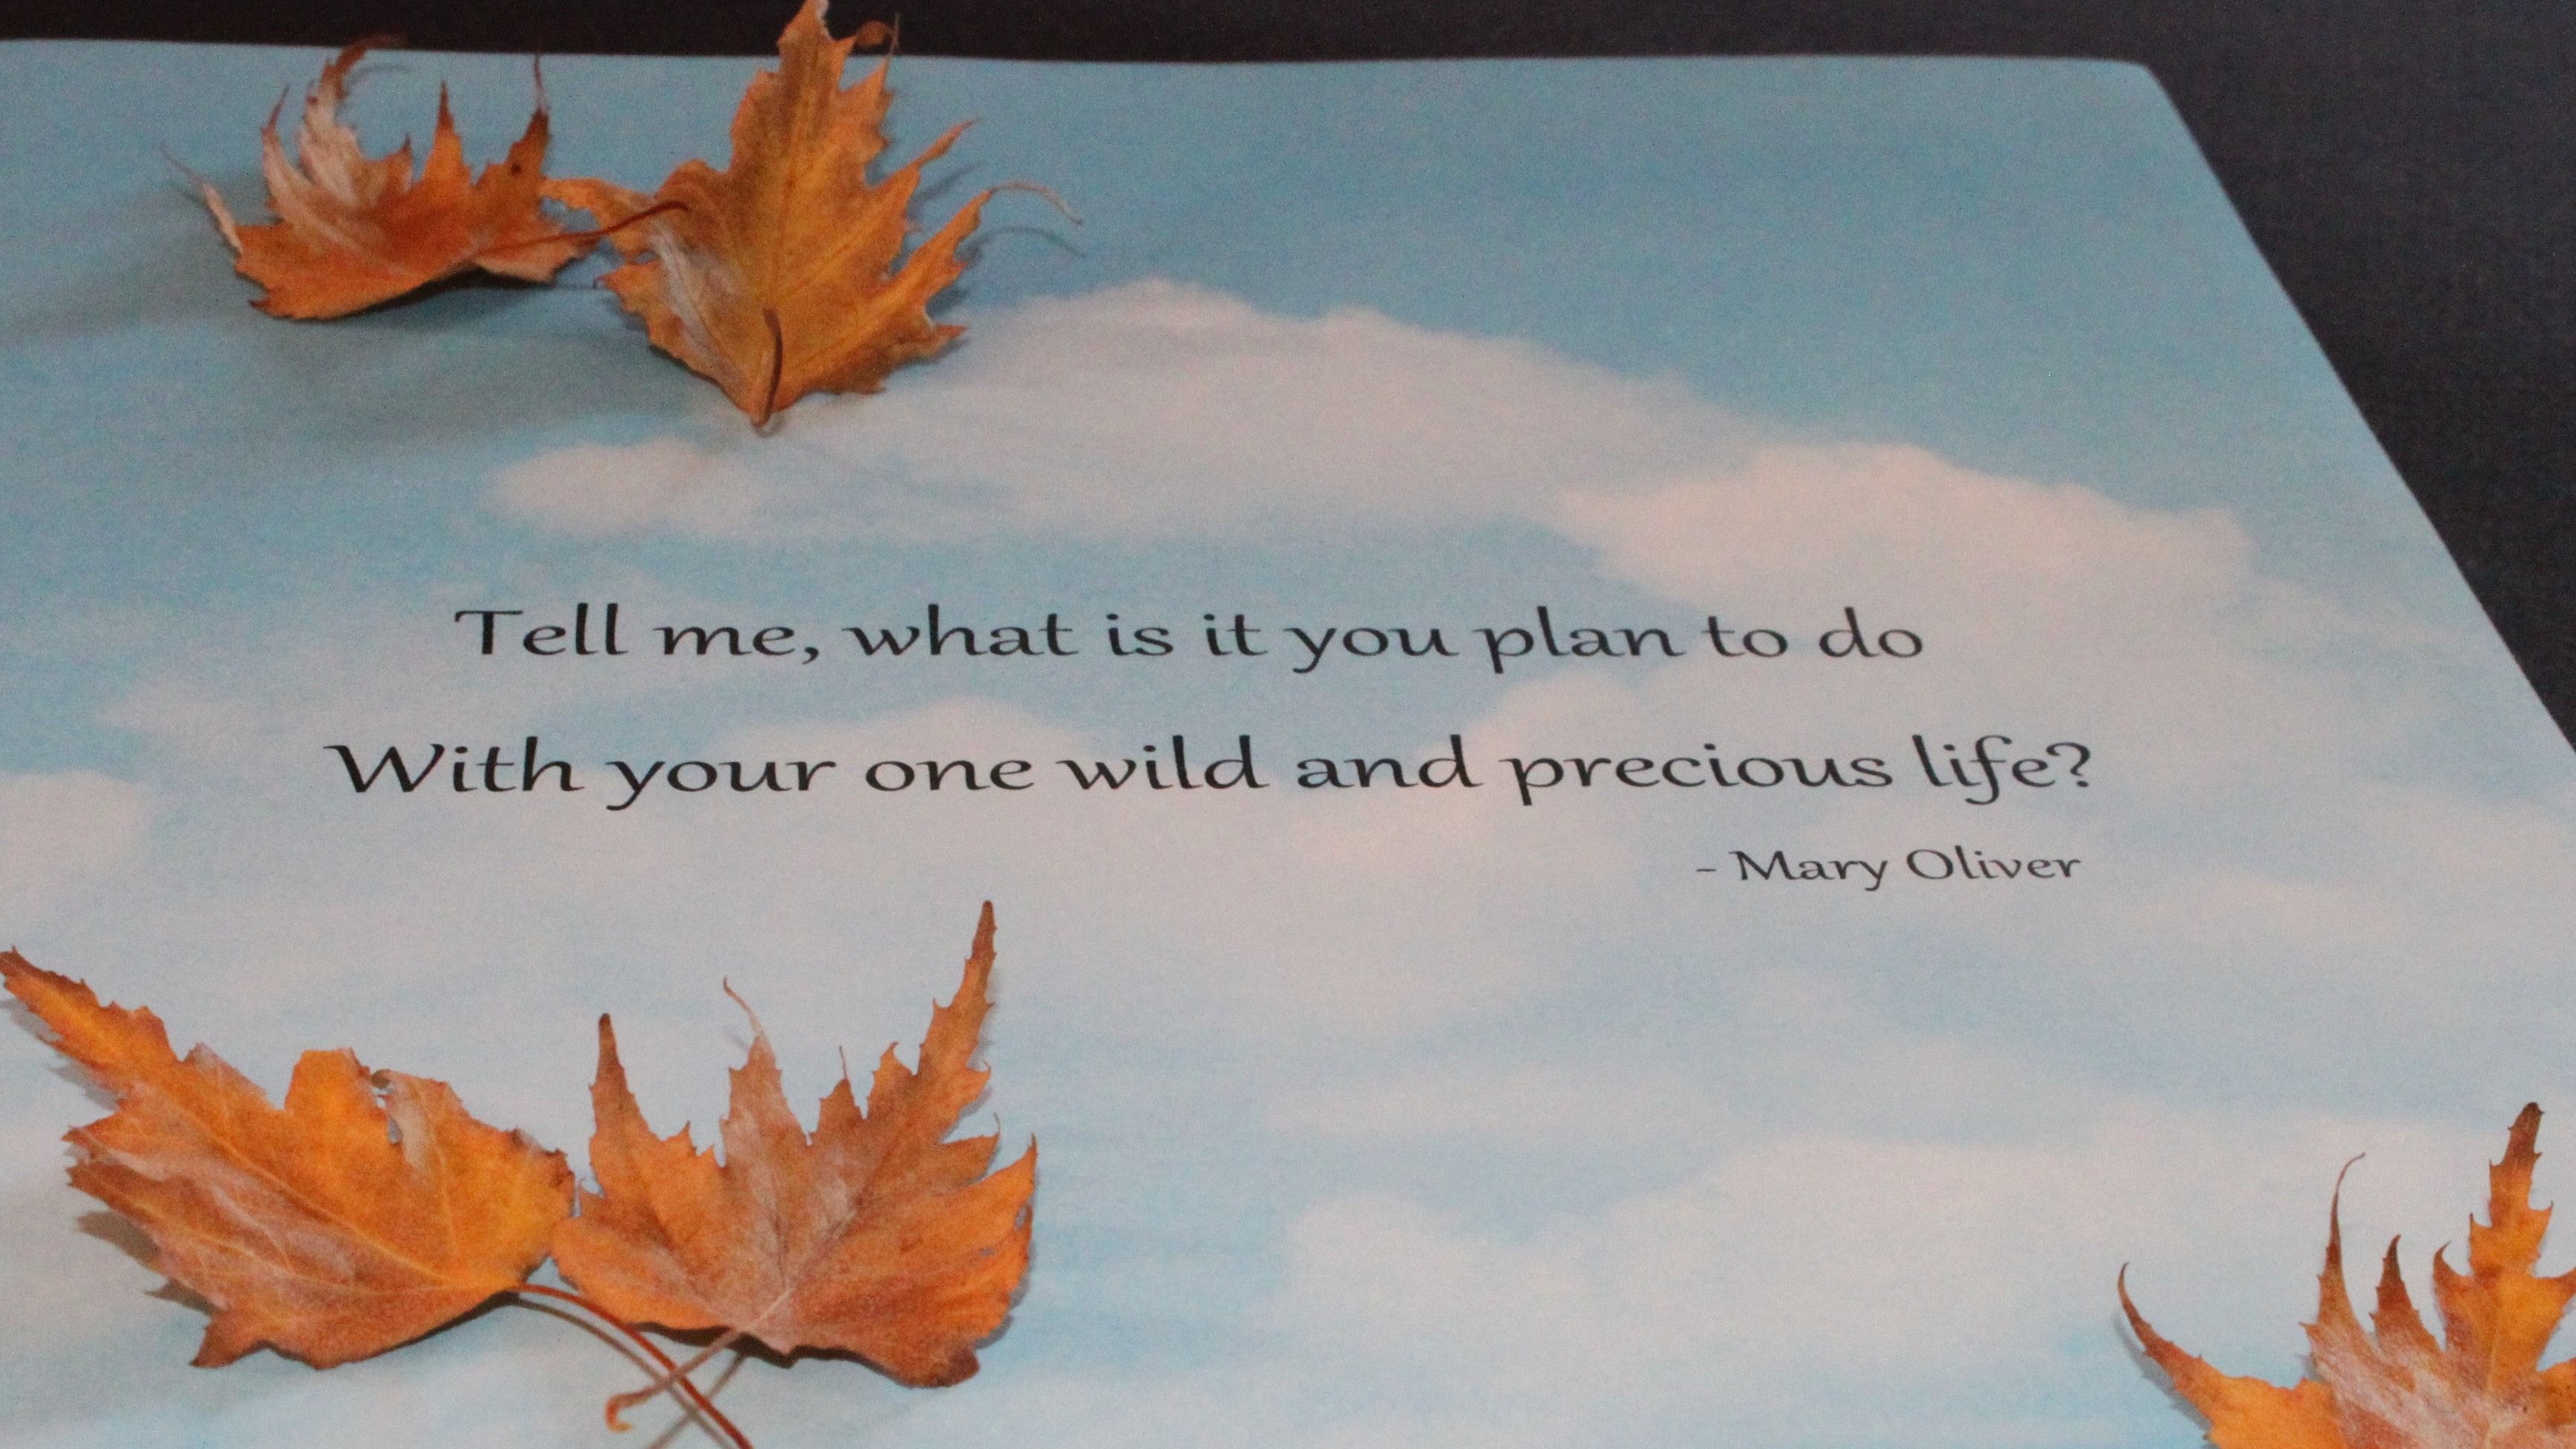 Mary Oliver's poem